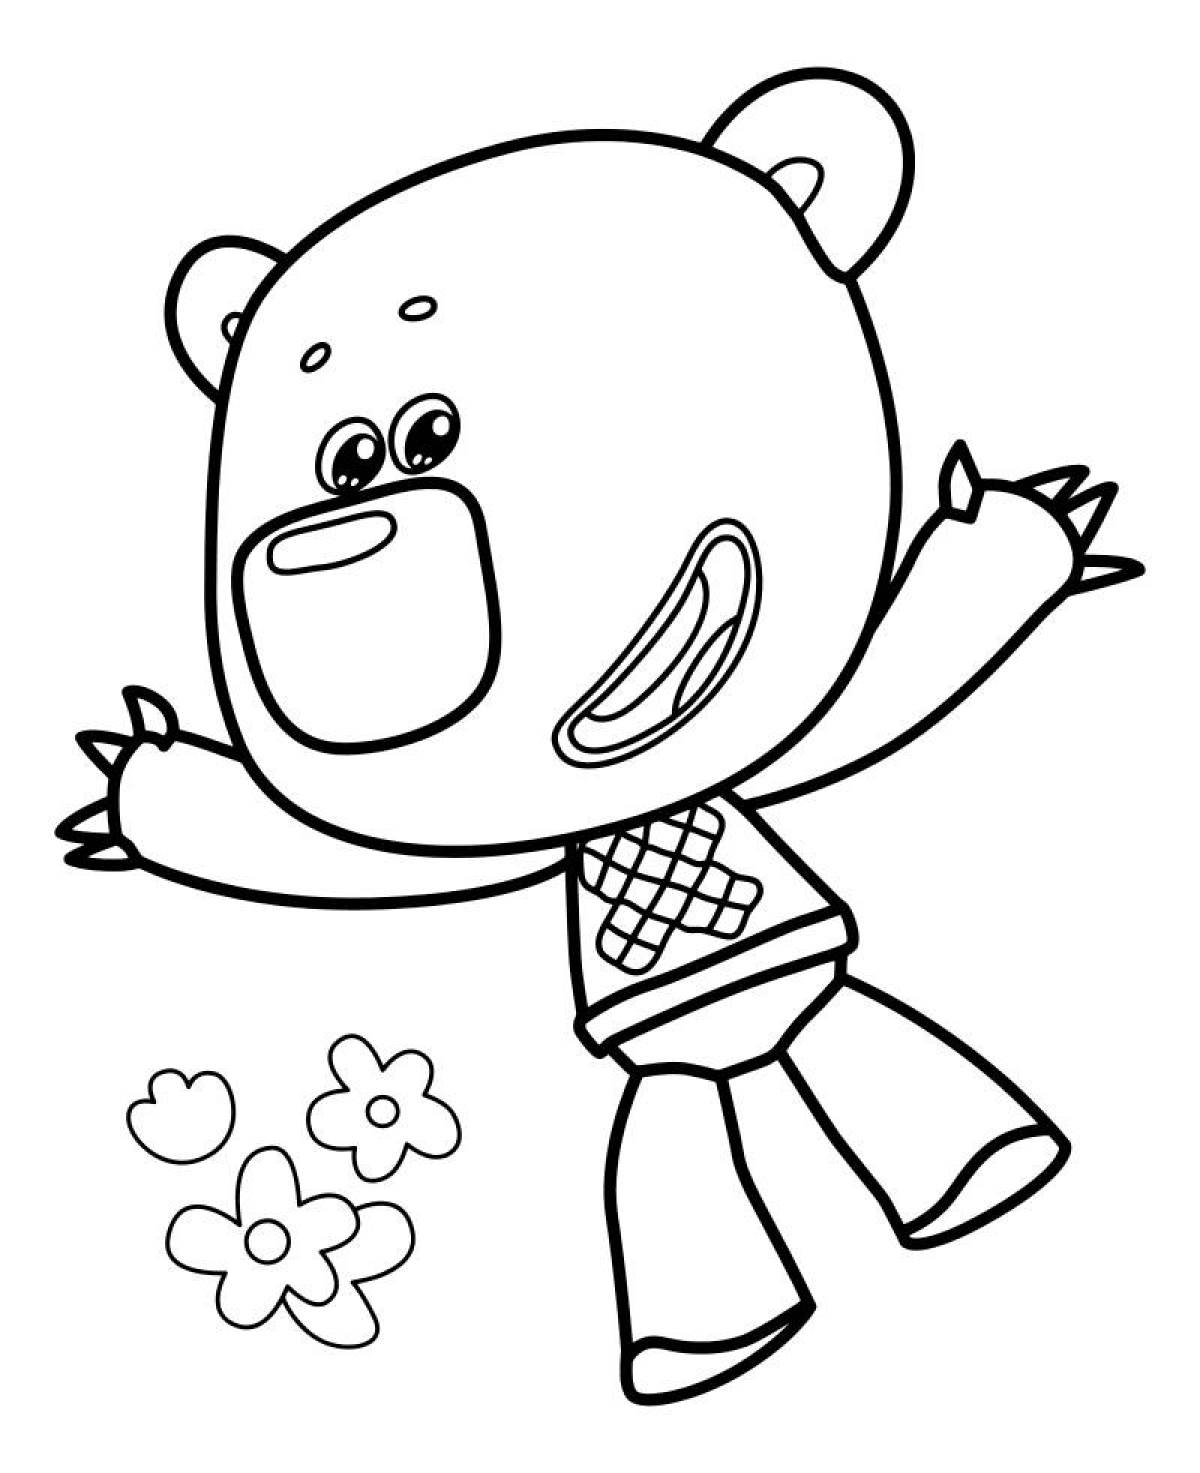 Turn on the cute bear coloring #9